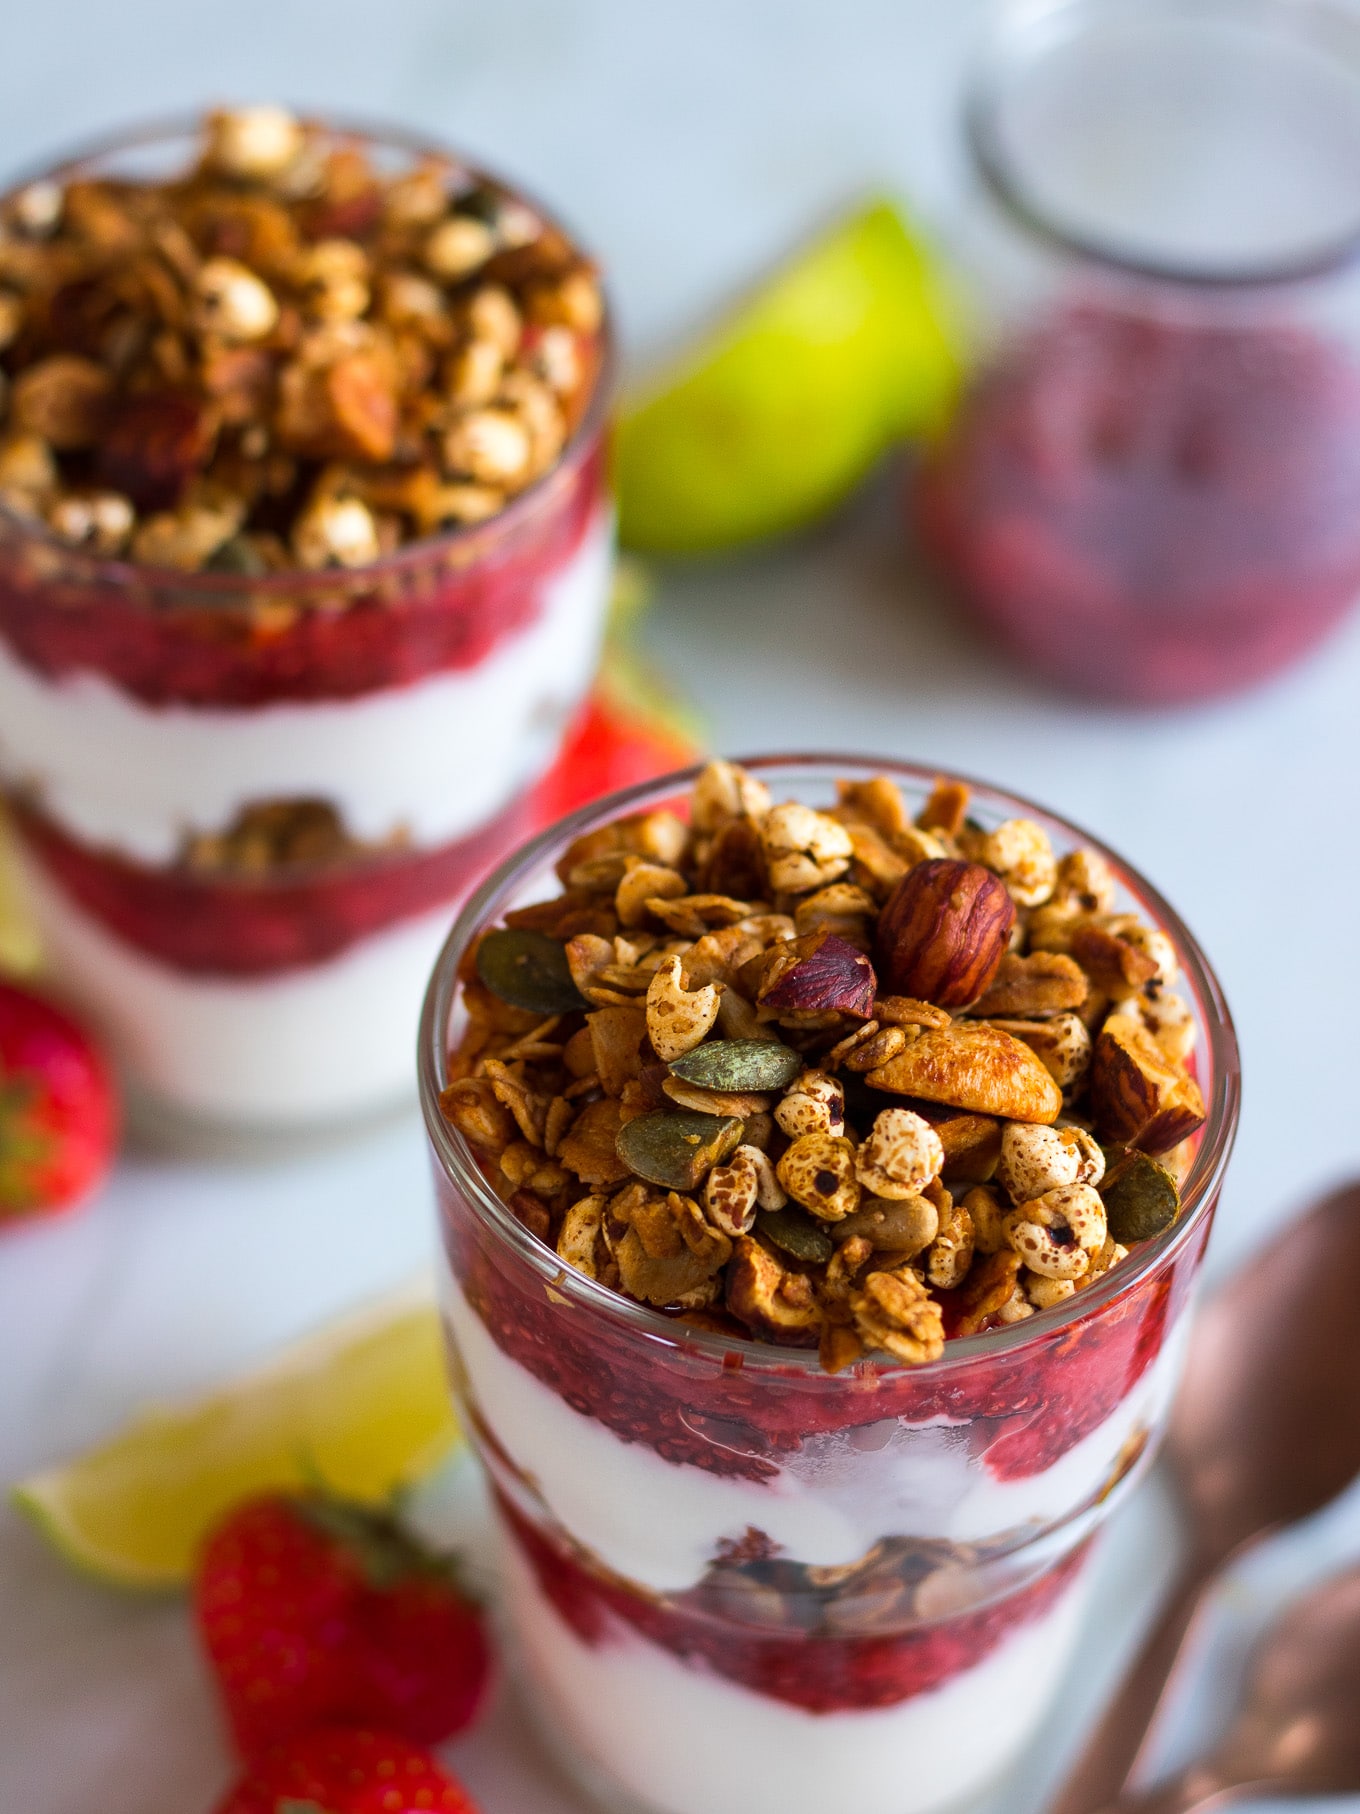 Strawberry Lime Chia Yoghurt Parfaits make a beautiful but simple breakfast, snack or even a healthy dessert! They're perfect to meal prep and can be made gluten free and dairy free too. #glutenfree #yoghurtparfait